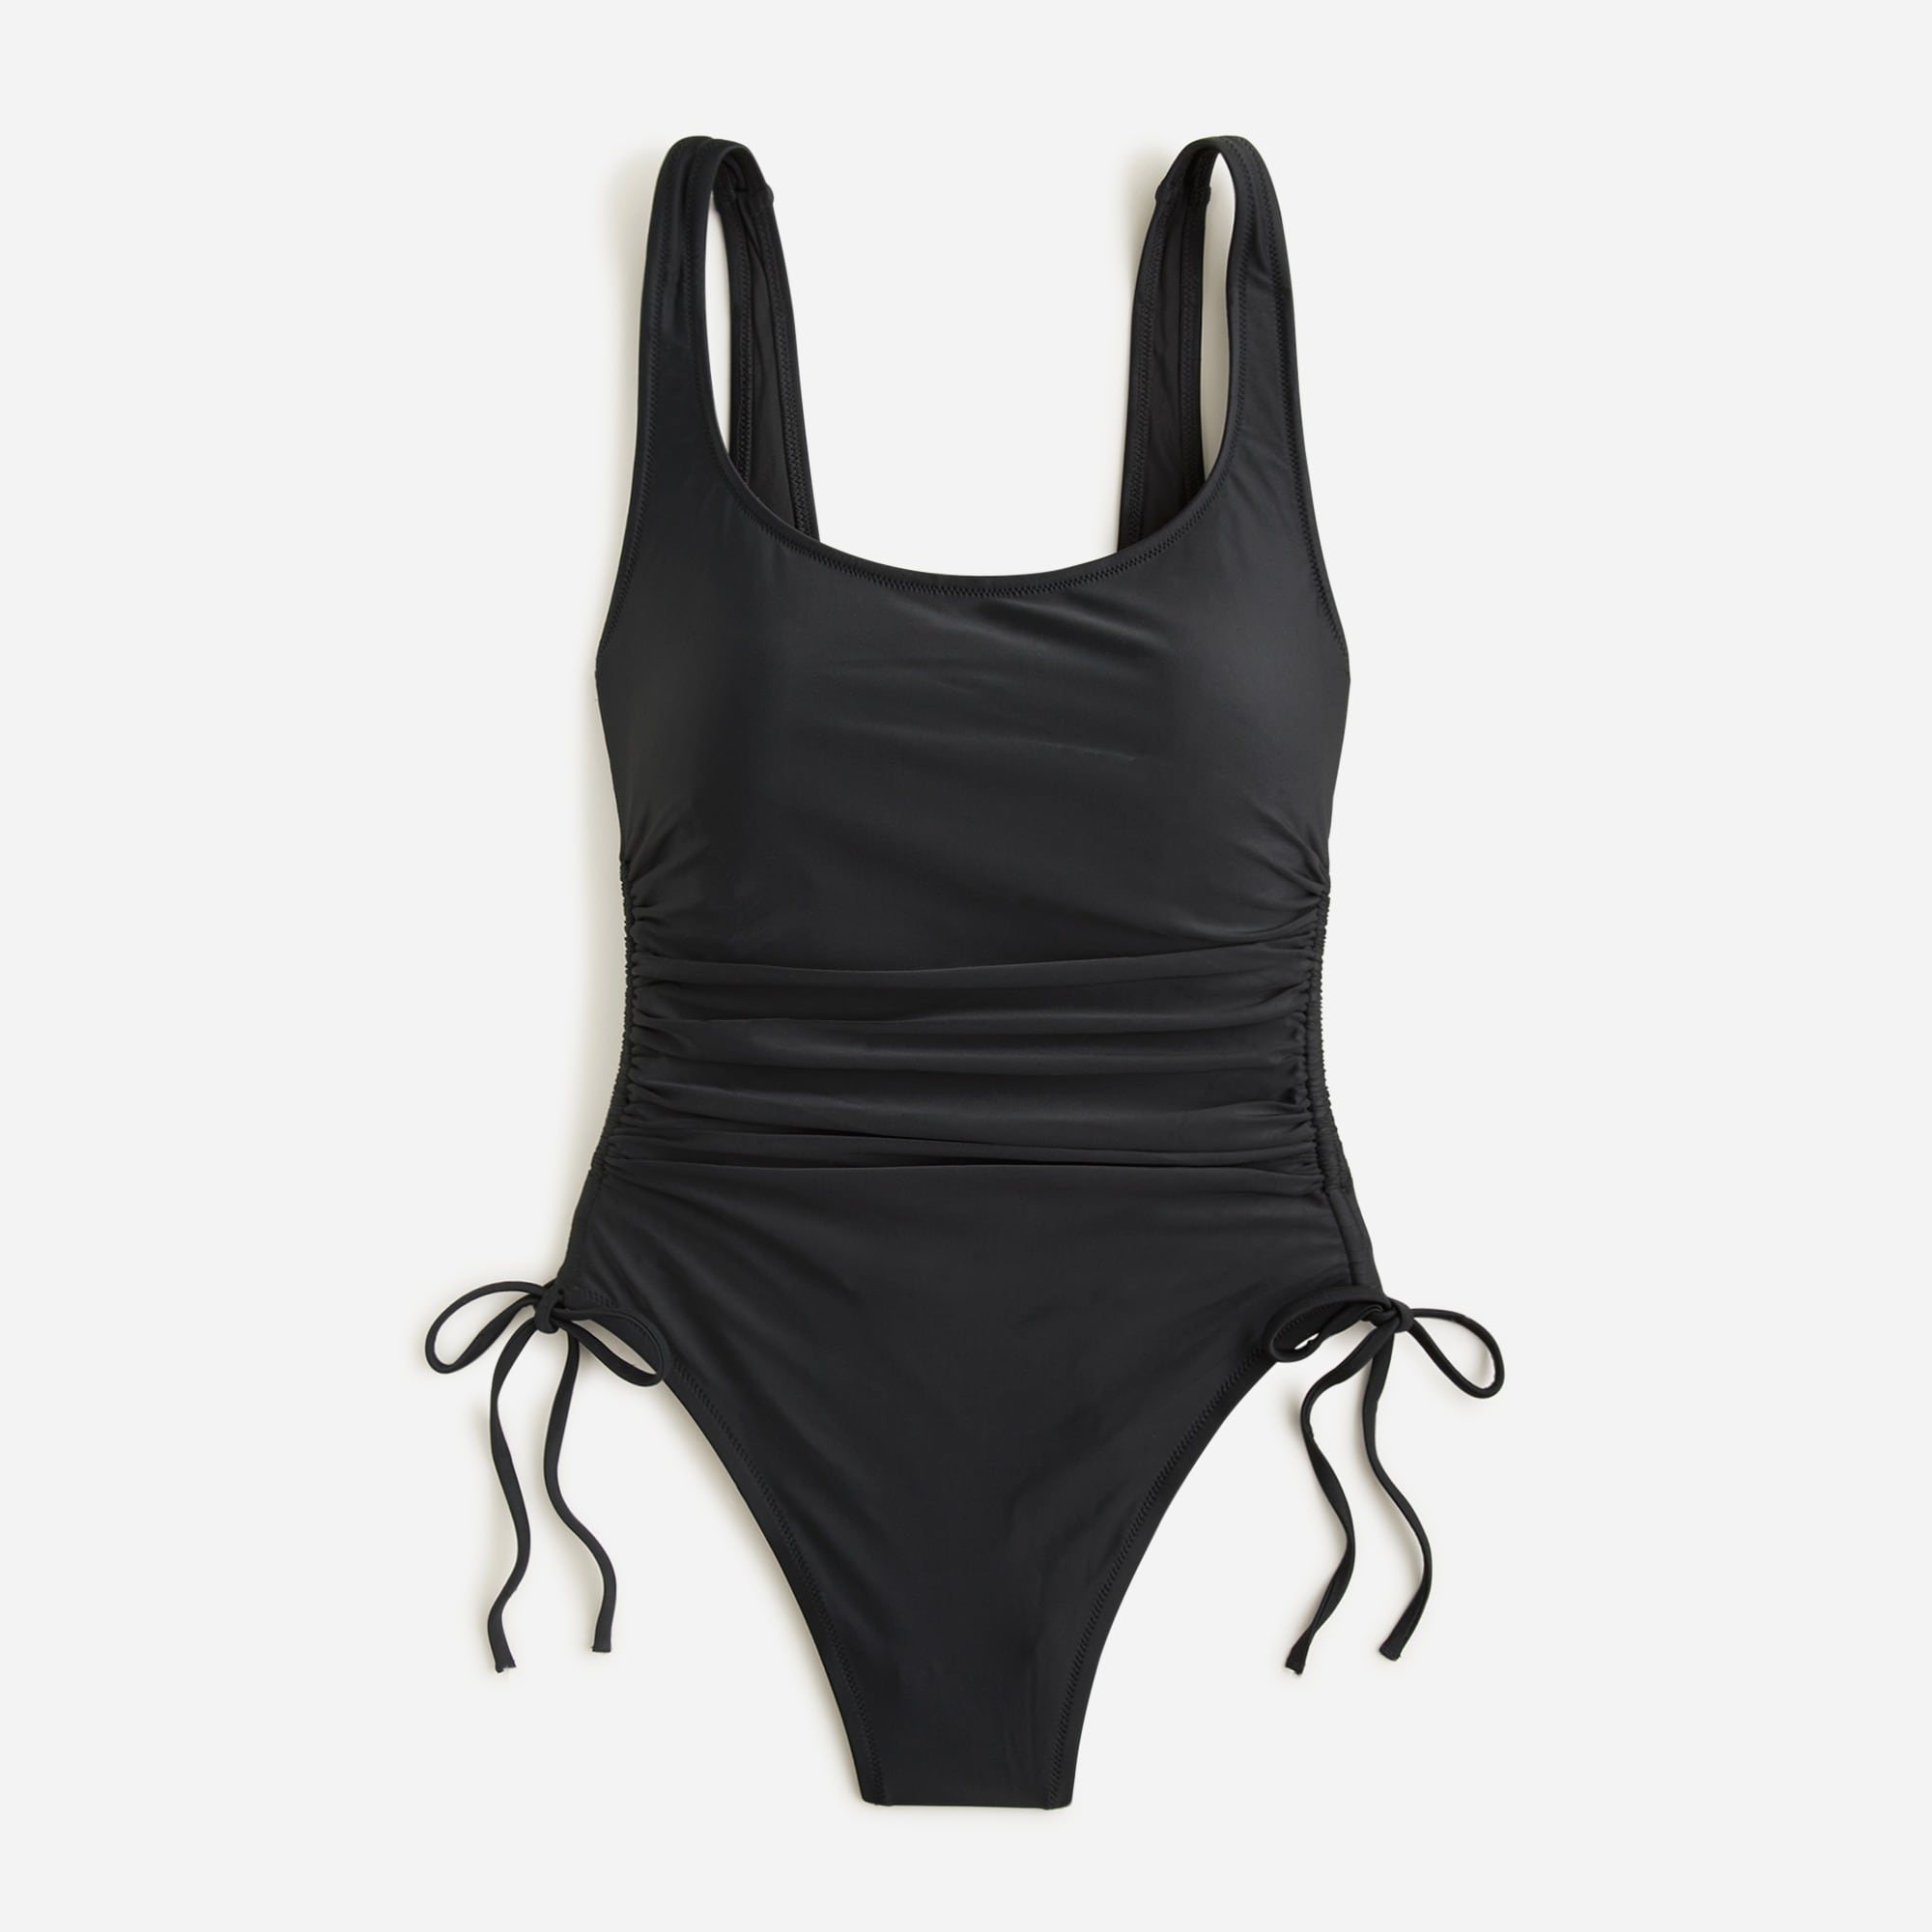 J.Crew: Ruched Side-tie One-piece Swimsuit For Women